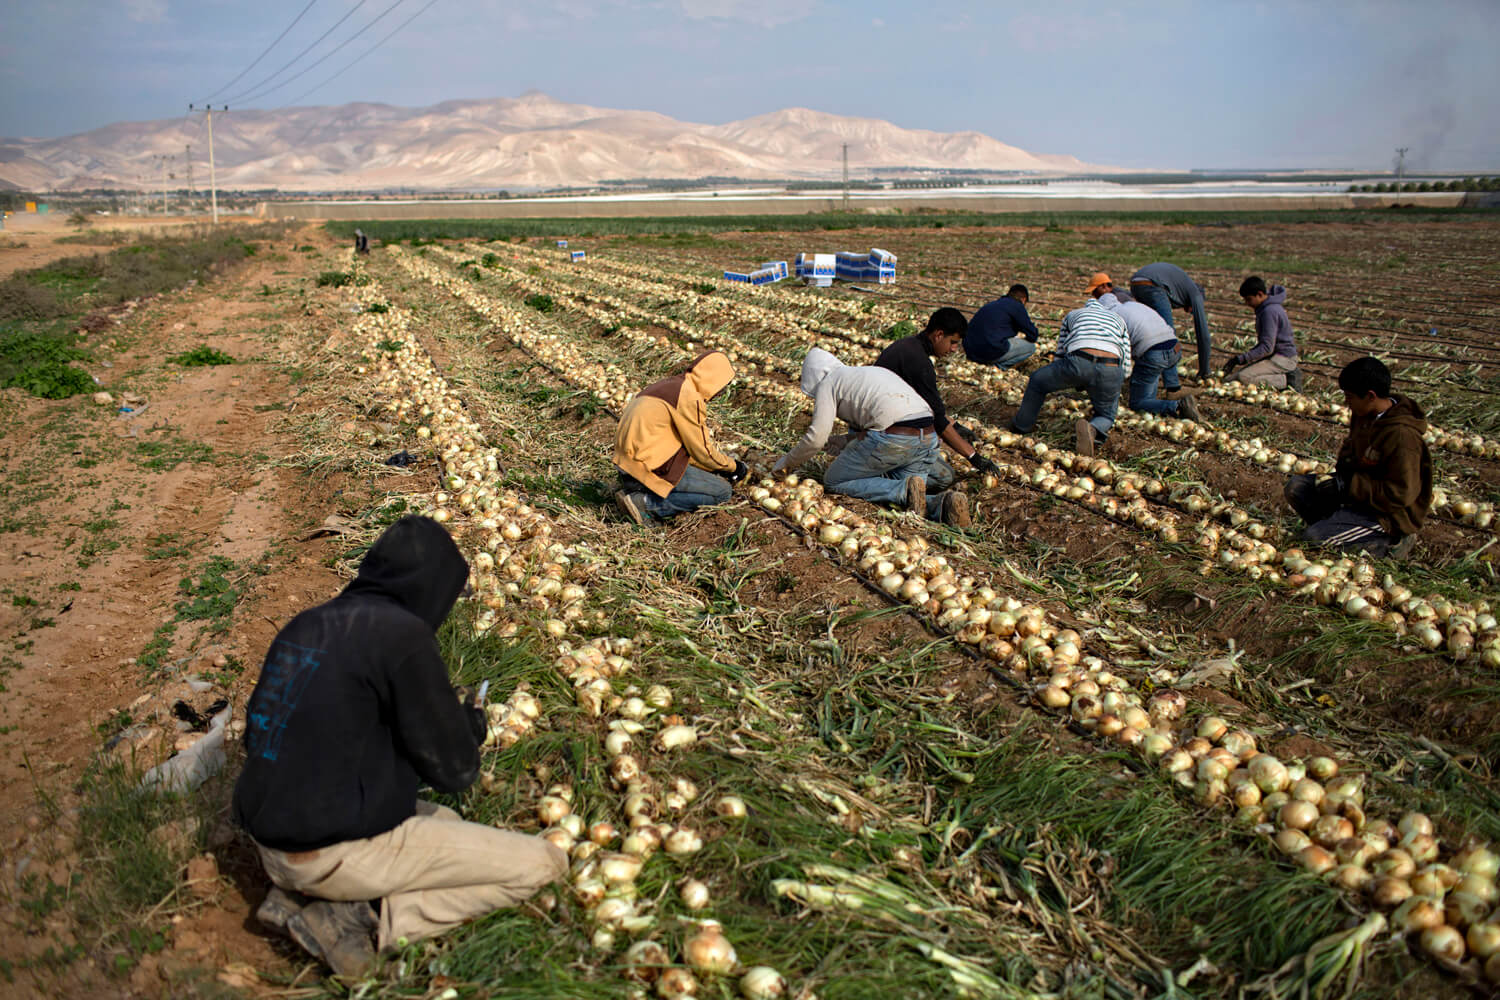 Palestinian workers farm onions in the Israeli agricultural settlement of Tomer in the Jordan Valley, West Bank, January 2015. (Photo: Oded Balilty/AP)